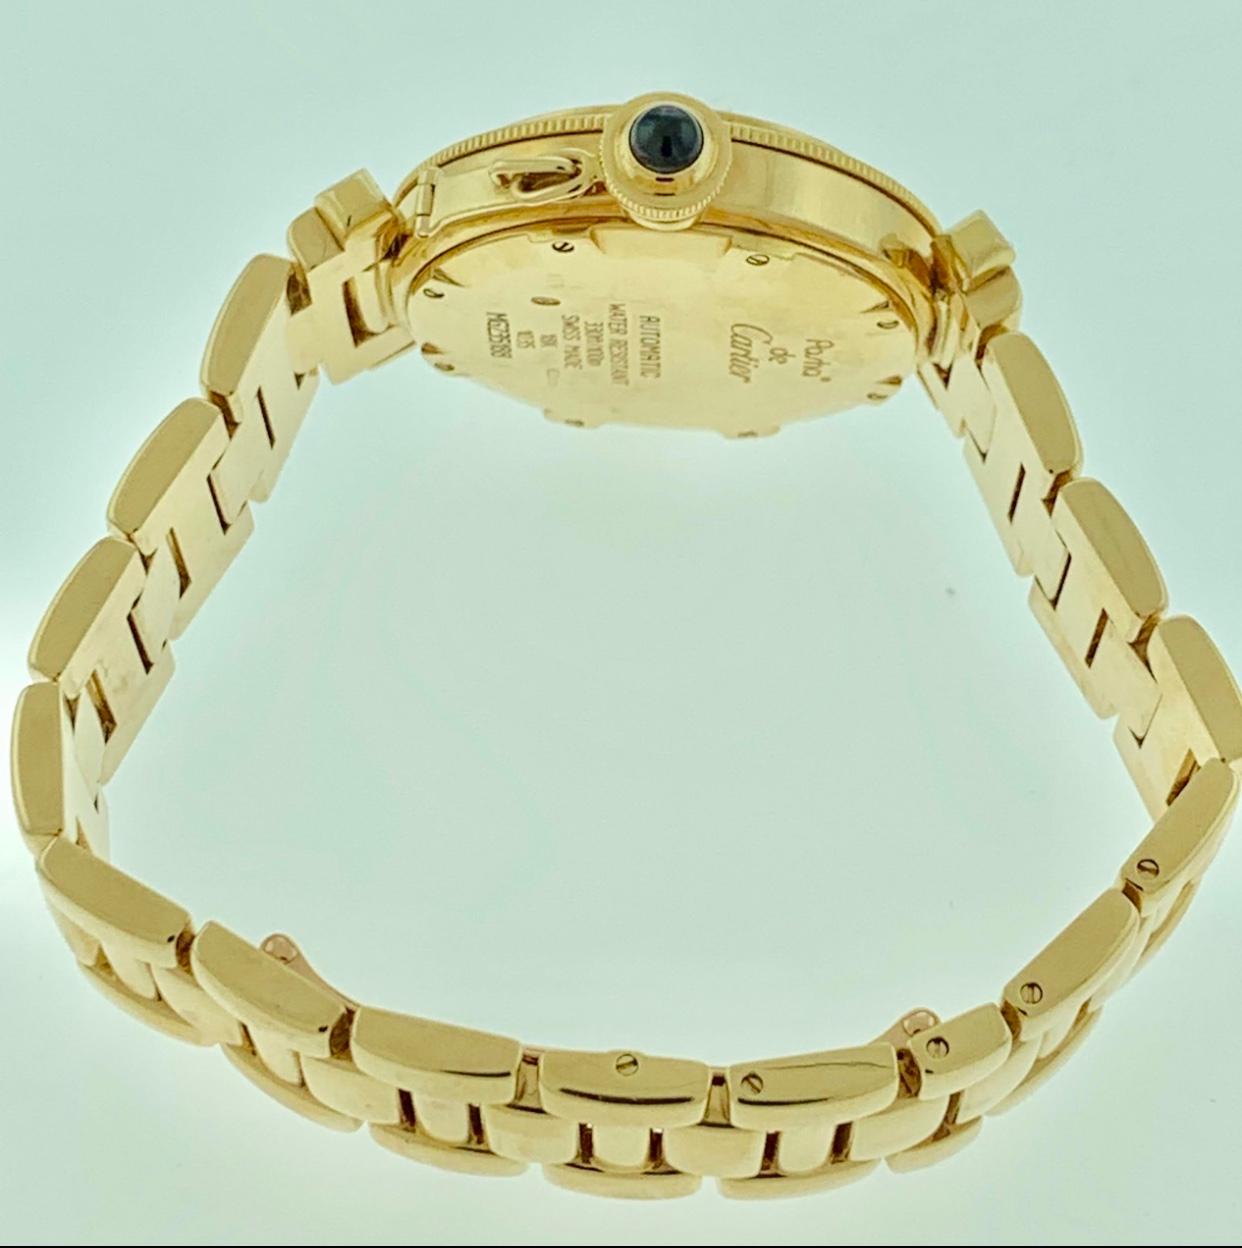 150 Gm 18 Karat Solid Yellow Gold Cartier Pasha Automatic Watch Water Resistant 7